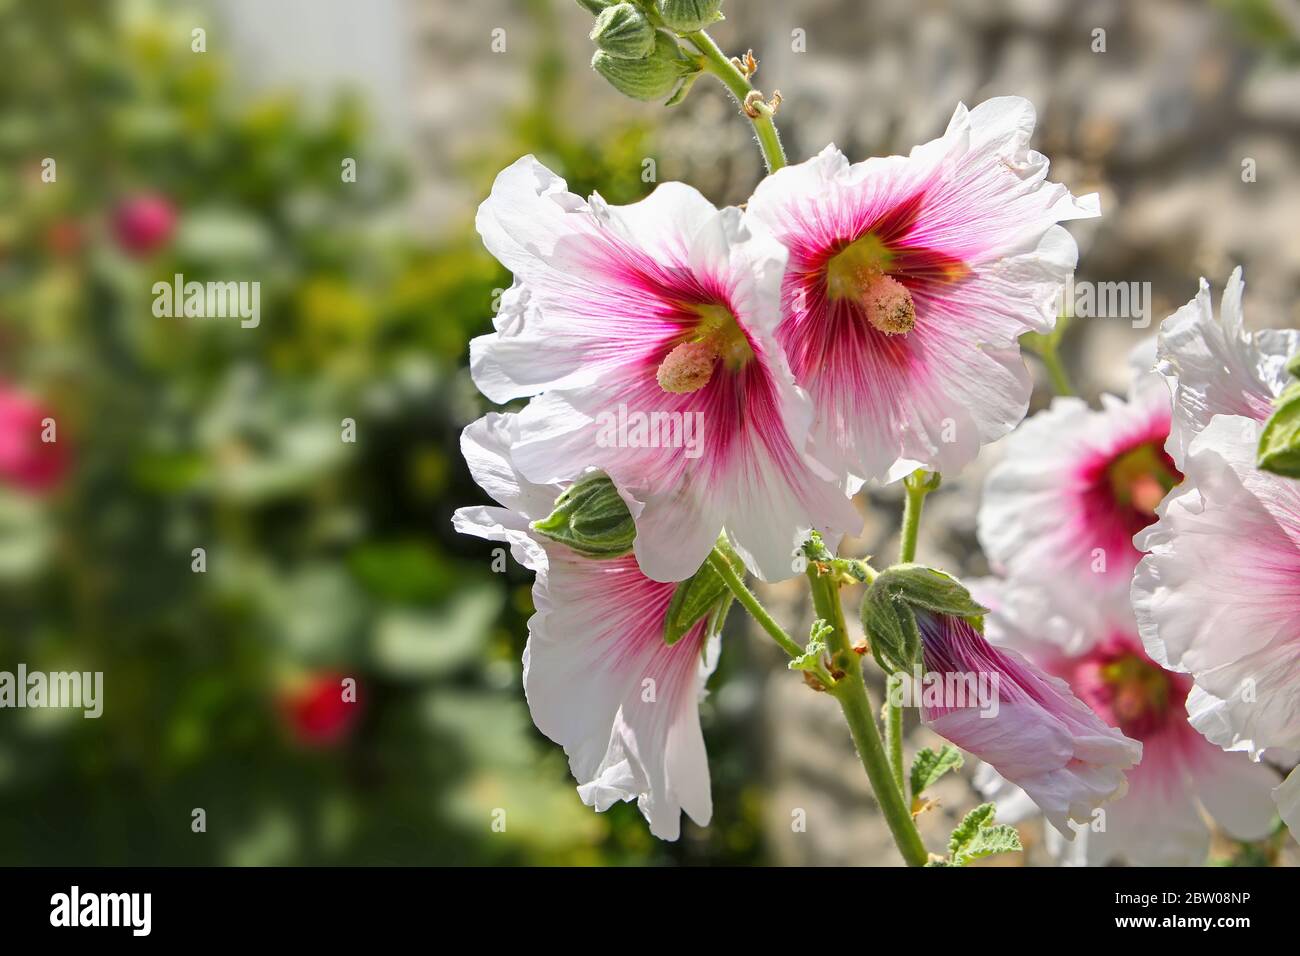 Beautiful hollyhock flower in bloom with white & pink petals and a green background, La Rochelle, Charente-Maritime, France. Stock Photo